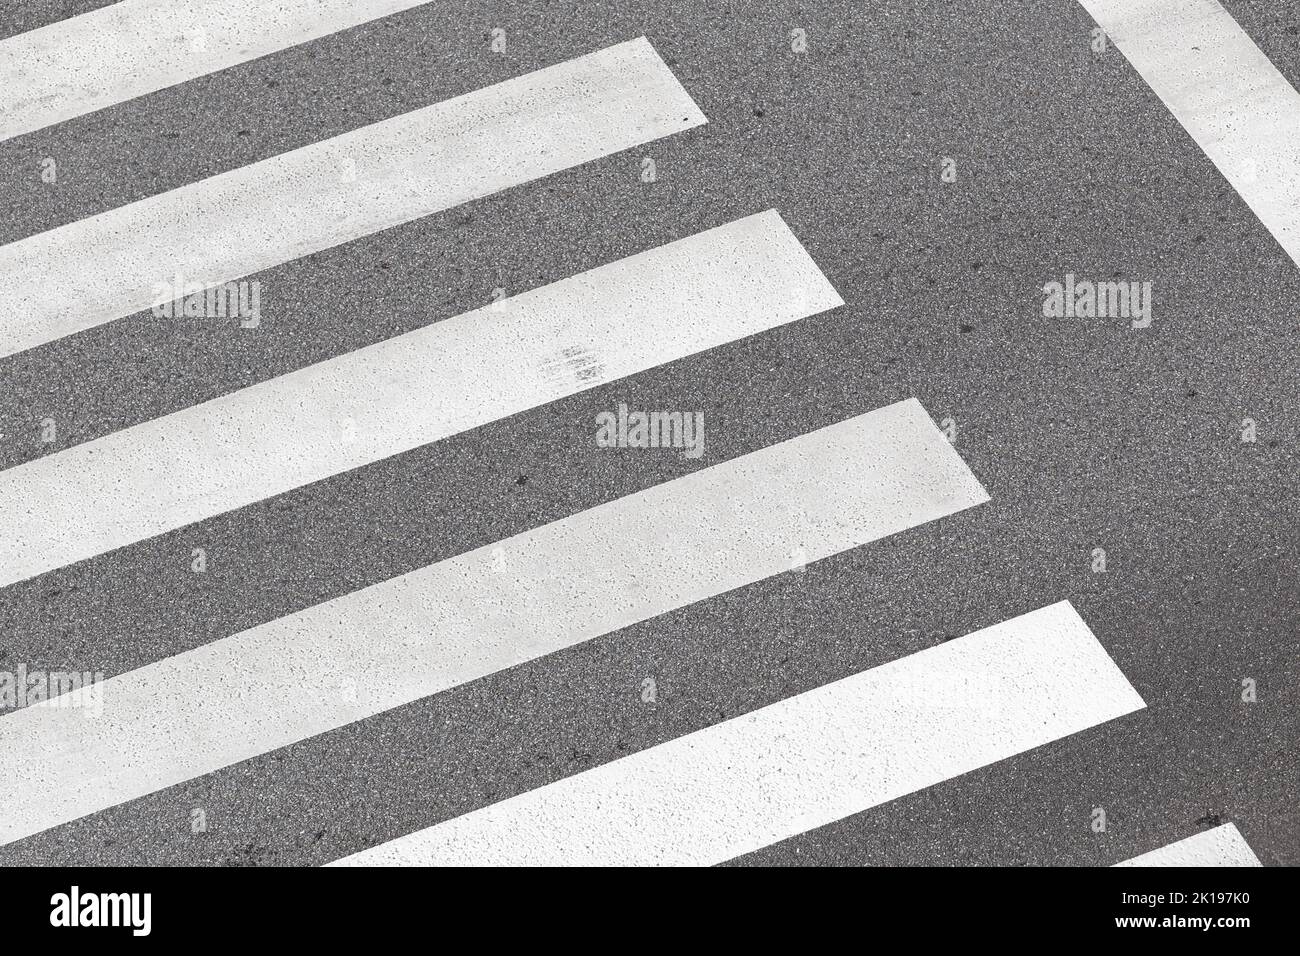 Zebra crossing background. High angle view of a crosswalk. No people Stock Photo